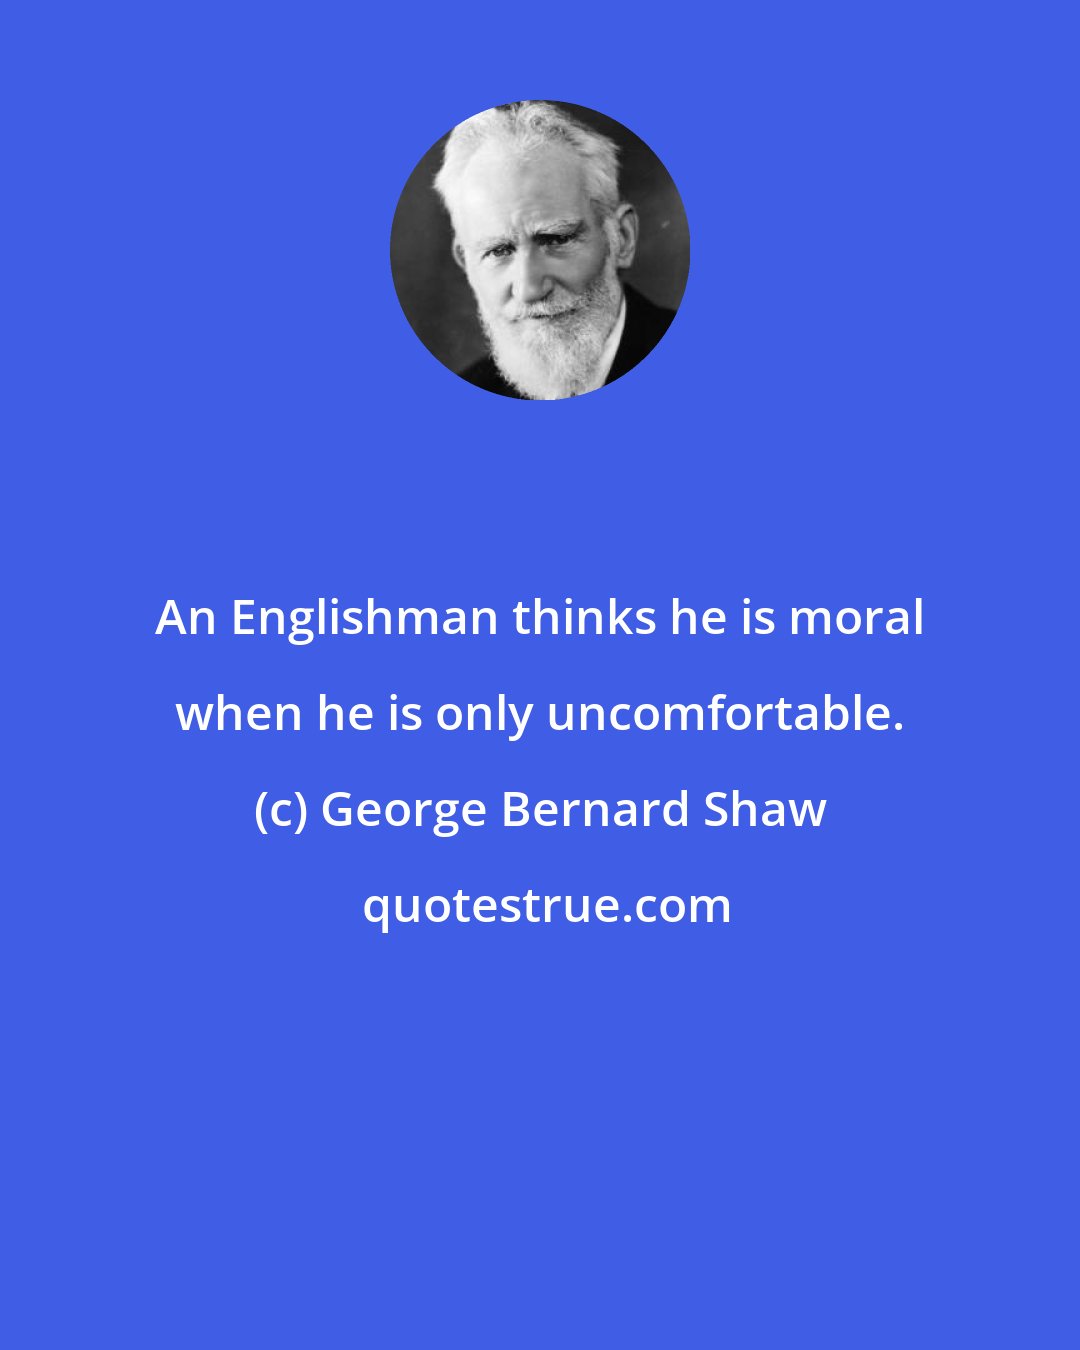 George Bernard Shaw: An Englishman thinks he is moral when he is only uncomfortable.